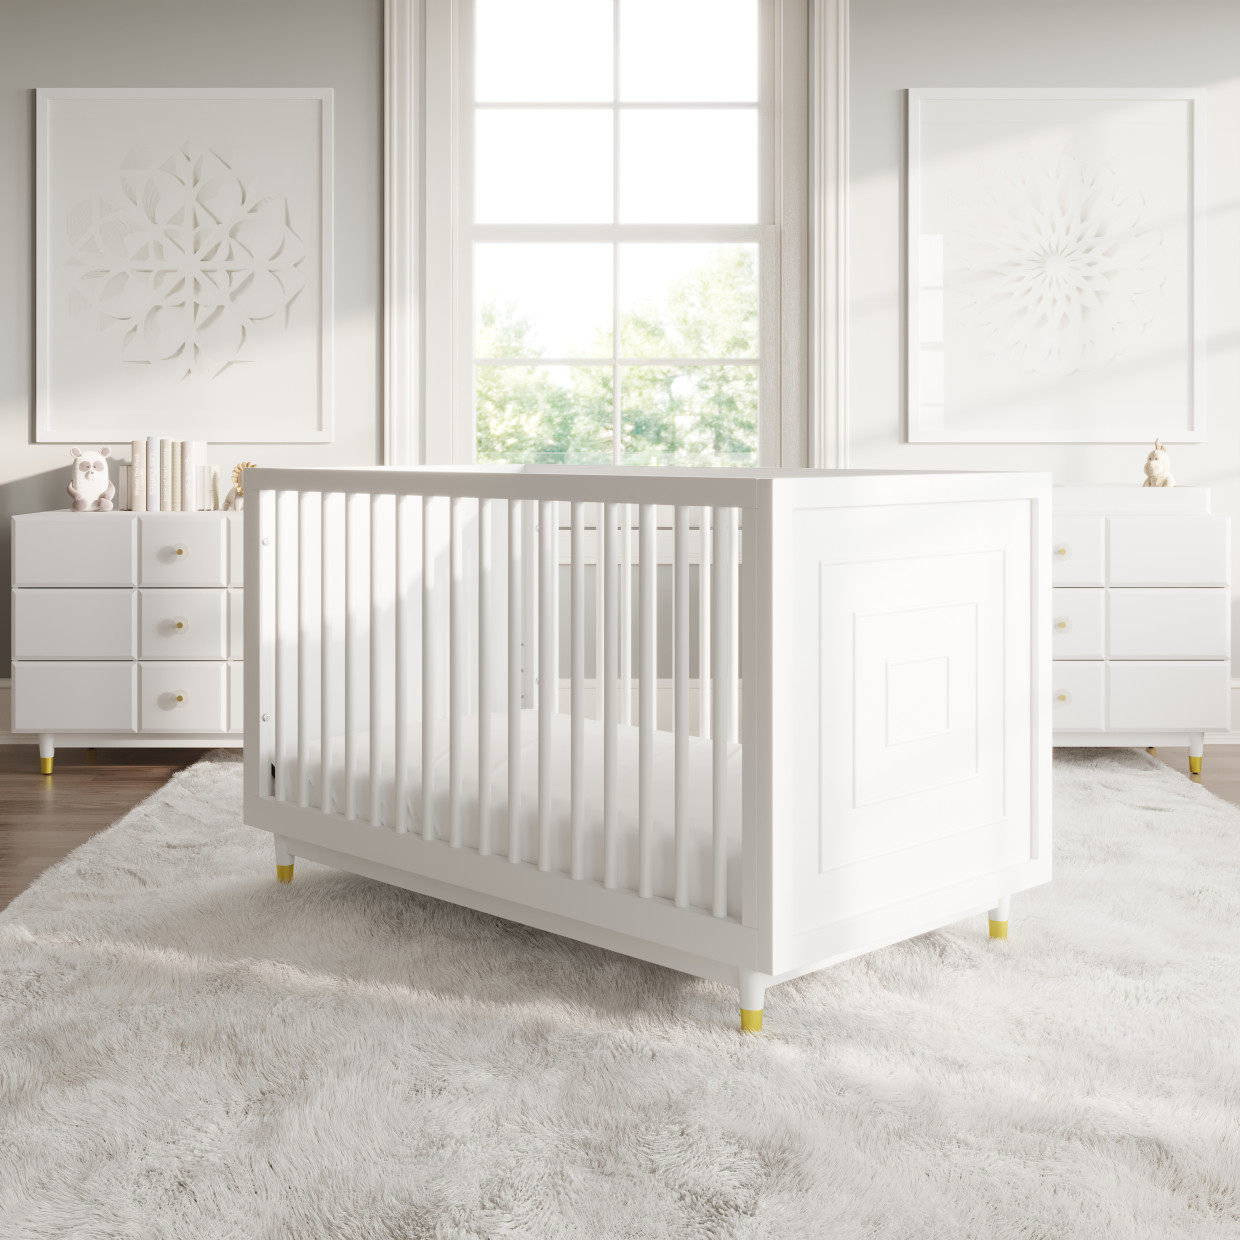 Little Seeds Aviary 3-in-1 Convertible Crib - White.